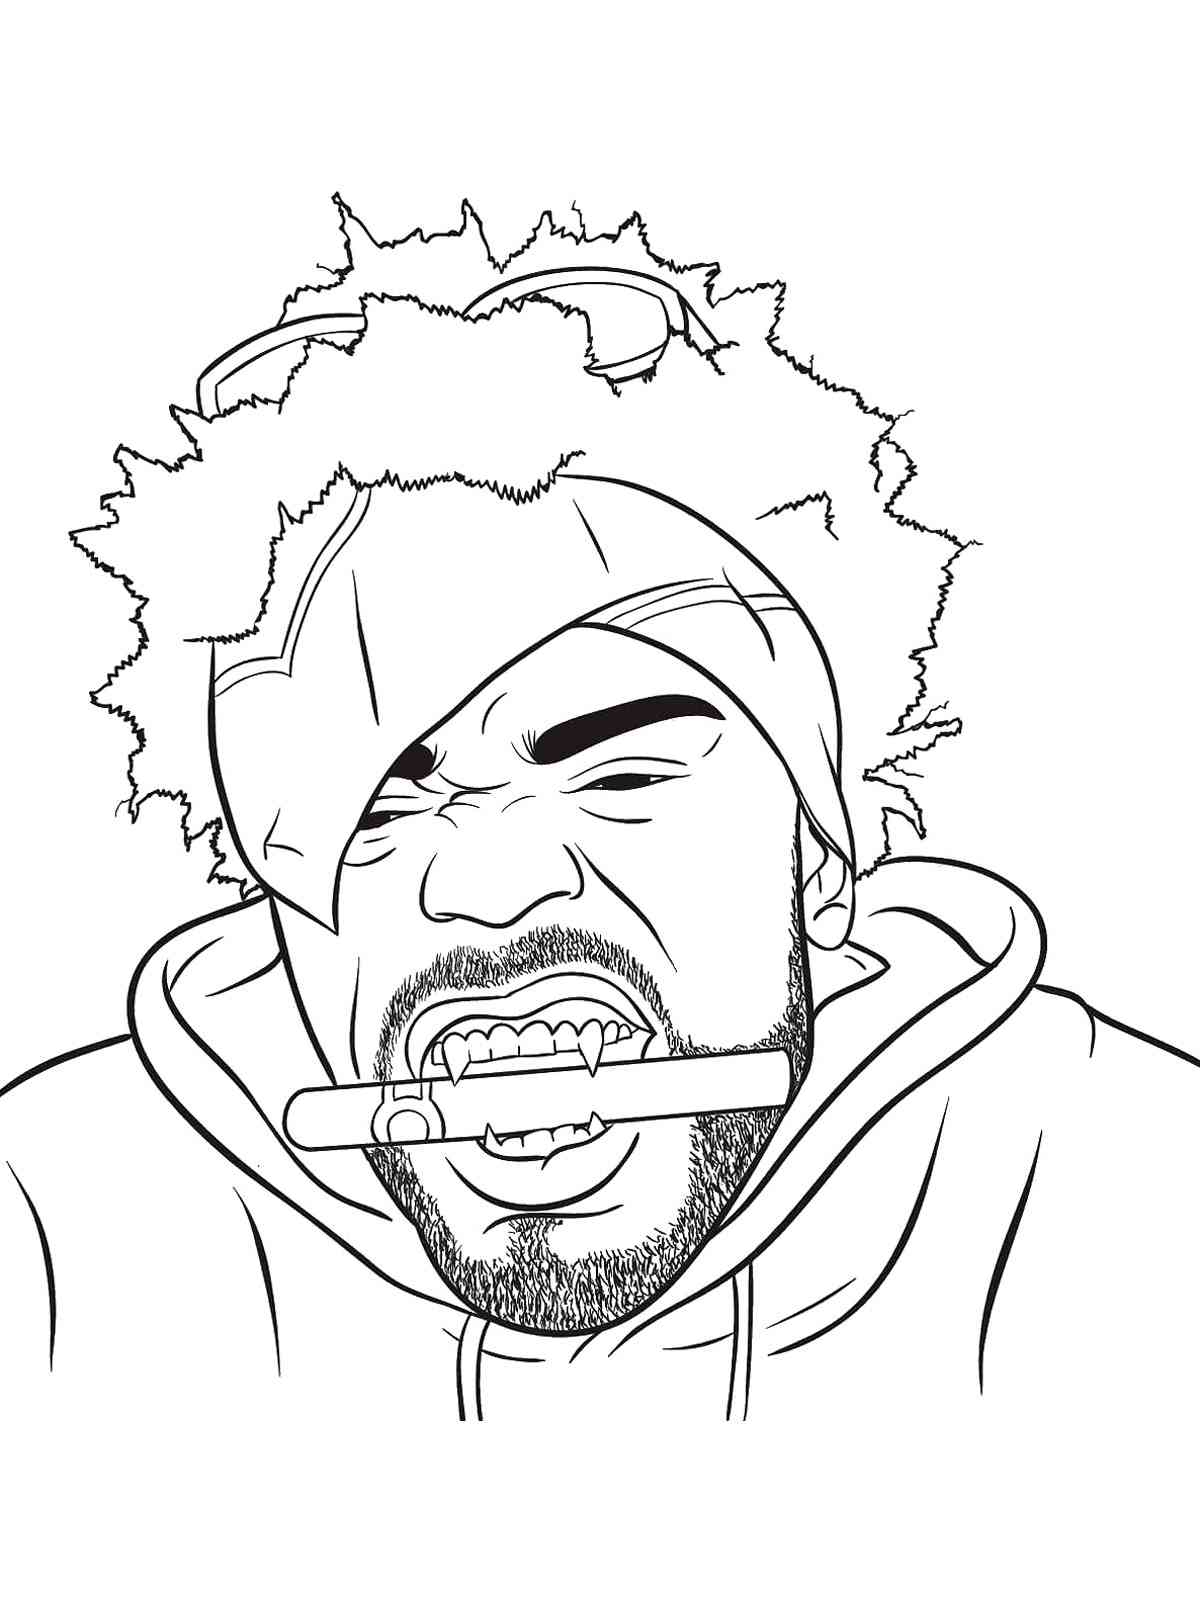 Funny Blueface coloring page